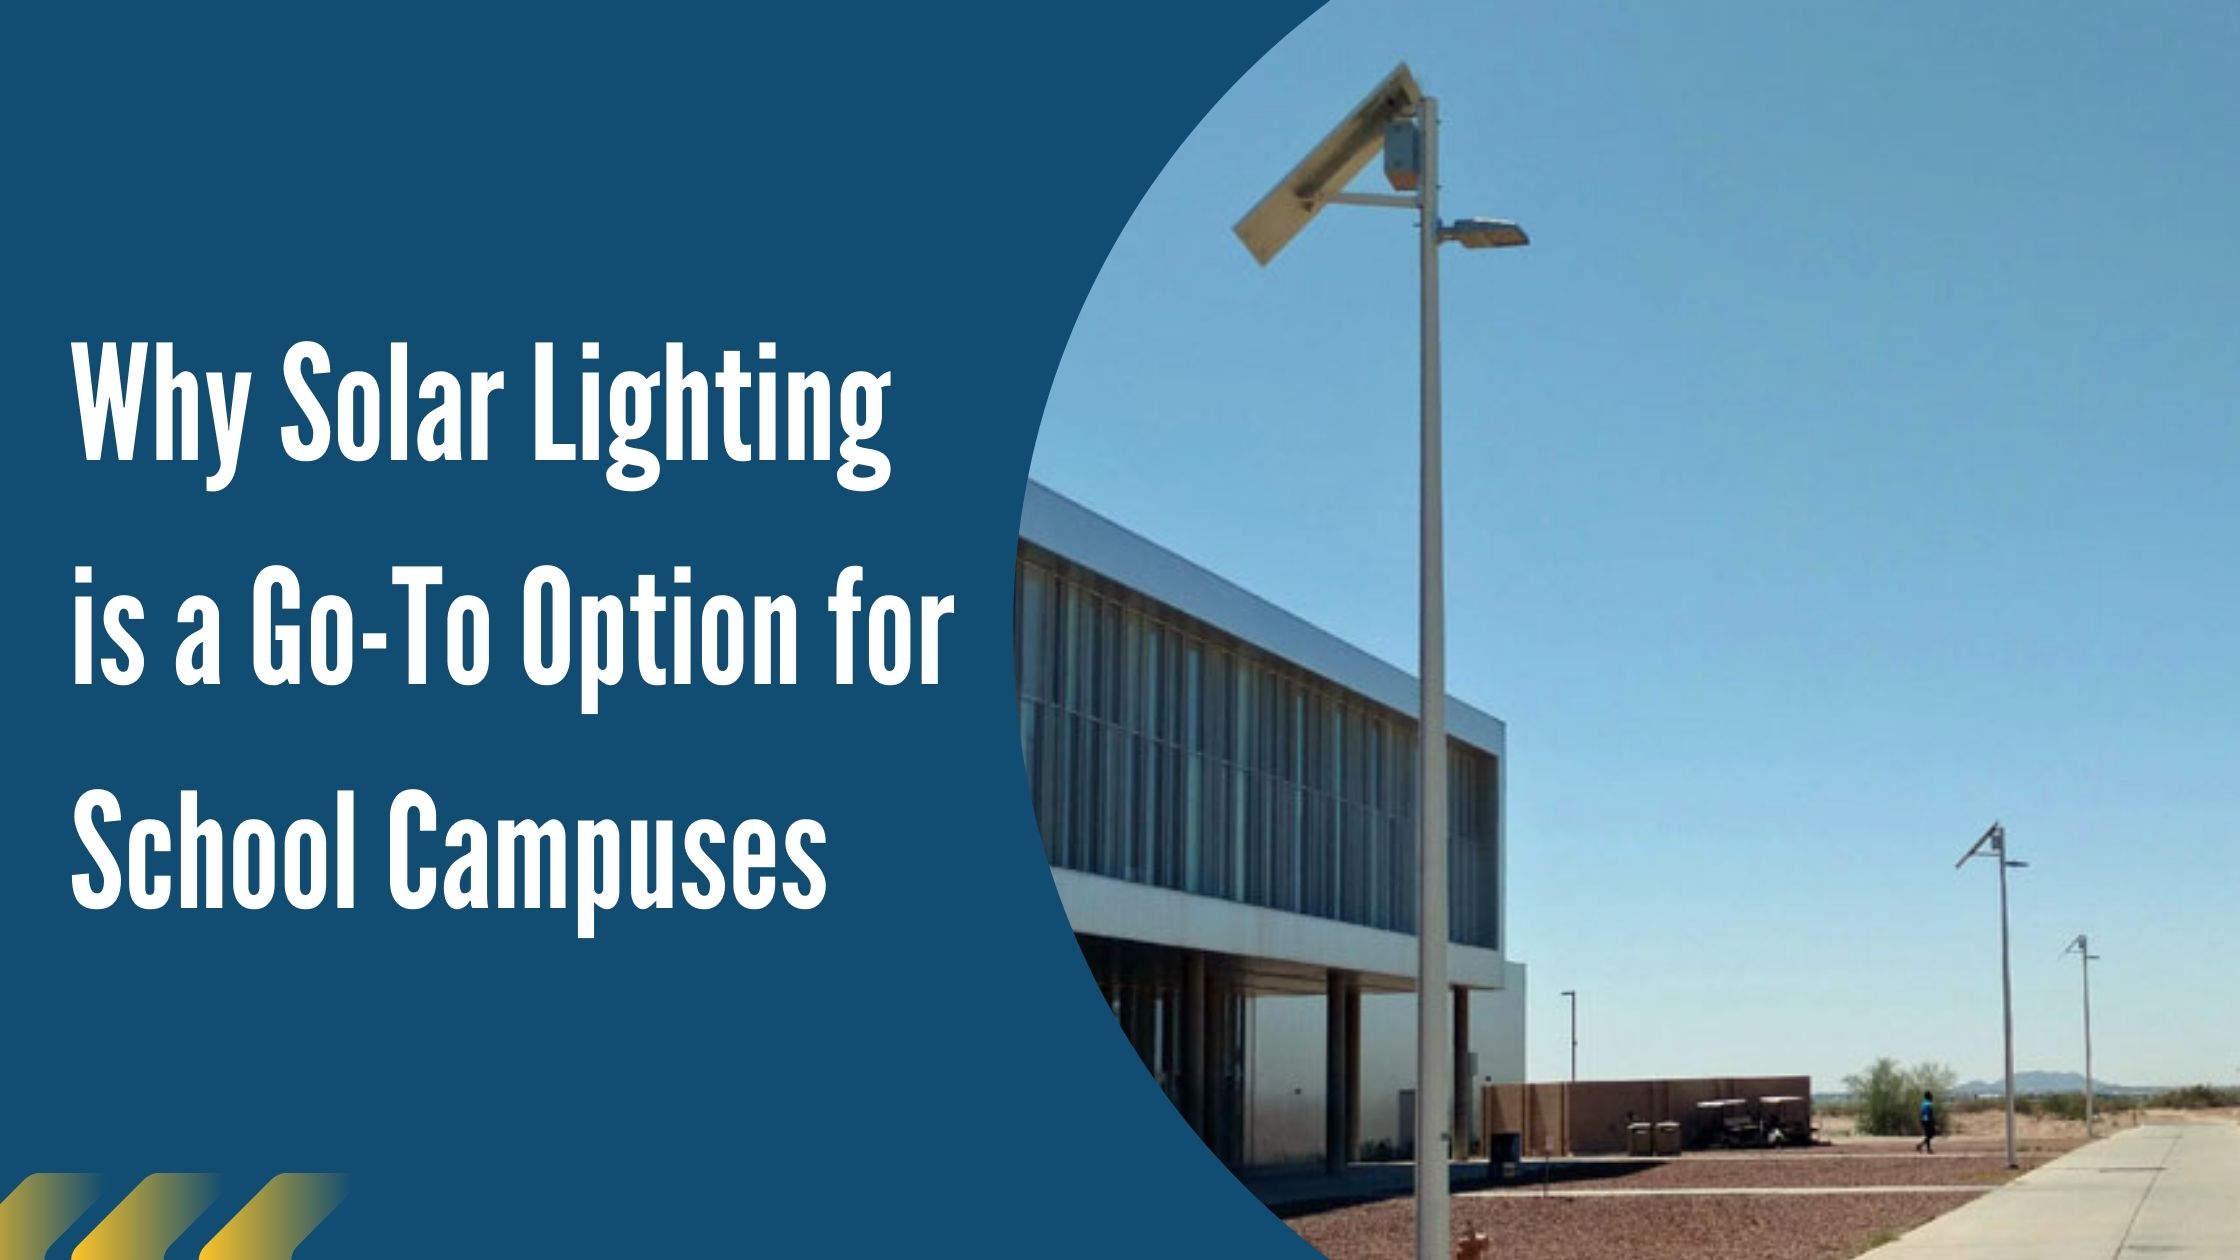 Why Solar Lighting is a Go-To Option for School Campuses